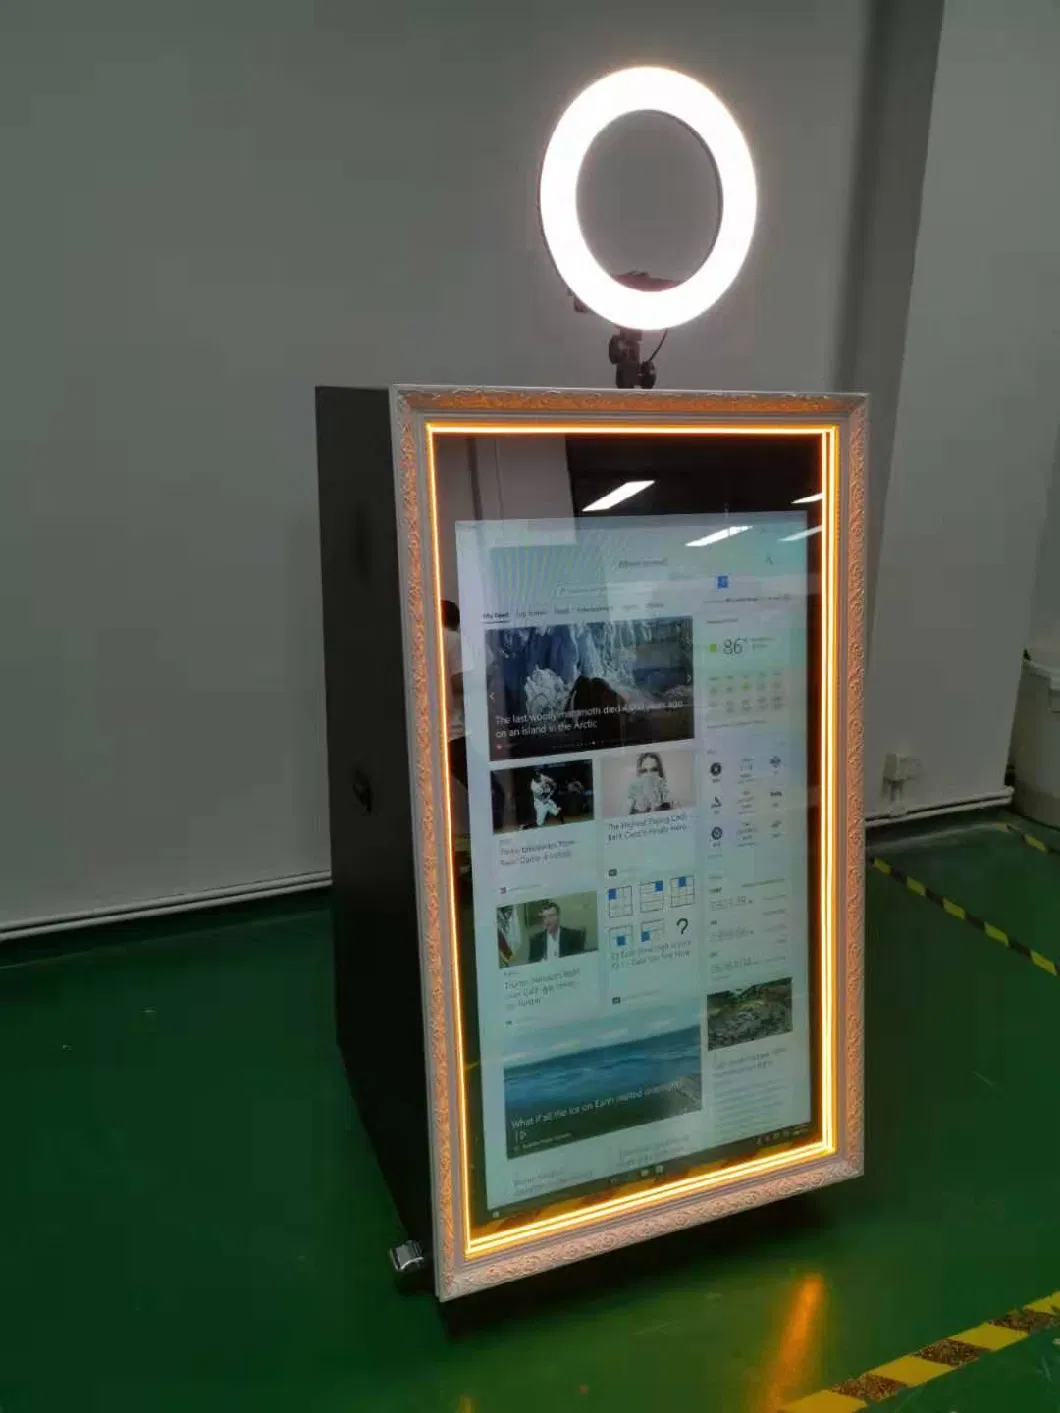 Newest Portable Magic Mirror Photo Booth with Camera Shell Flight Case